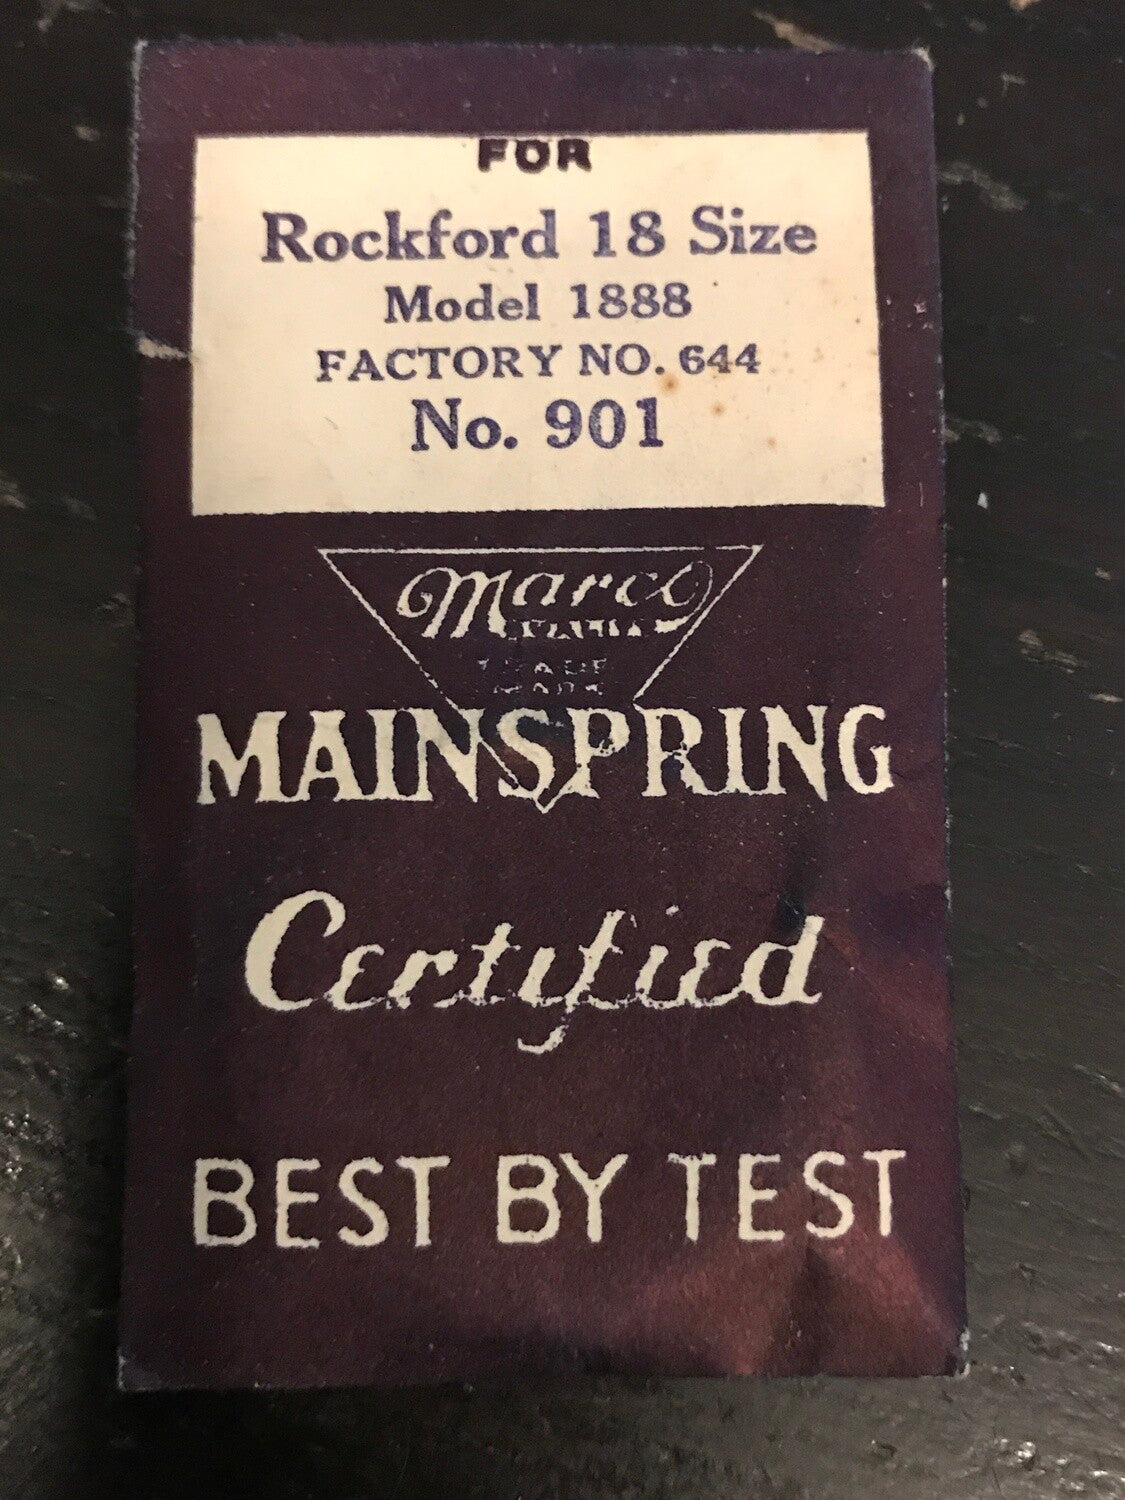 Marco Mainspring #901 for Rockford 18s Factory No. 644 - Steel